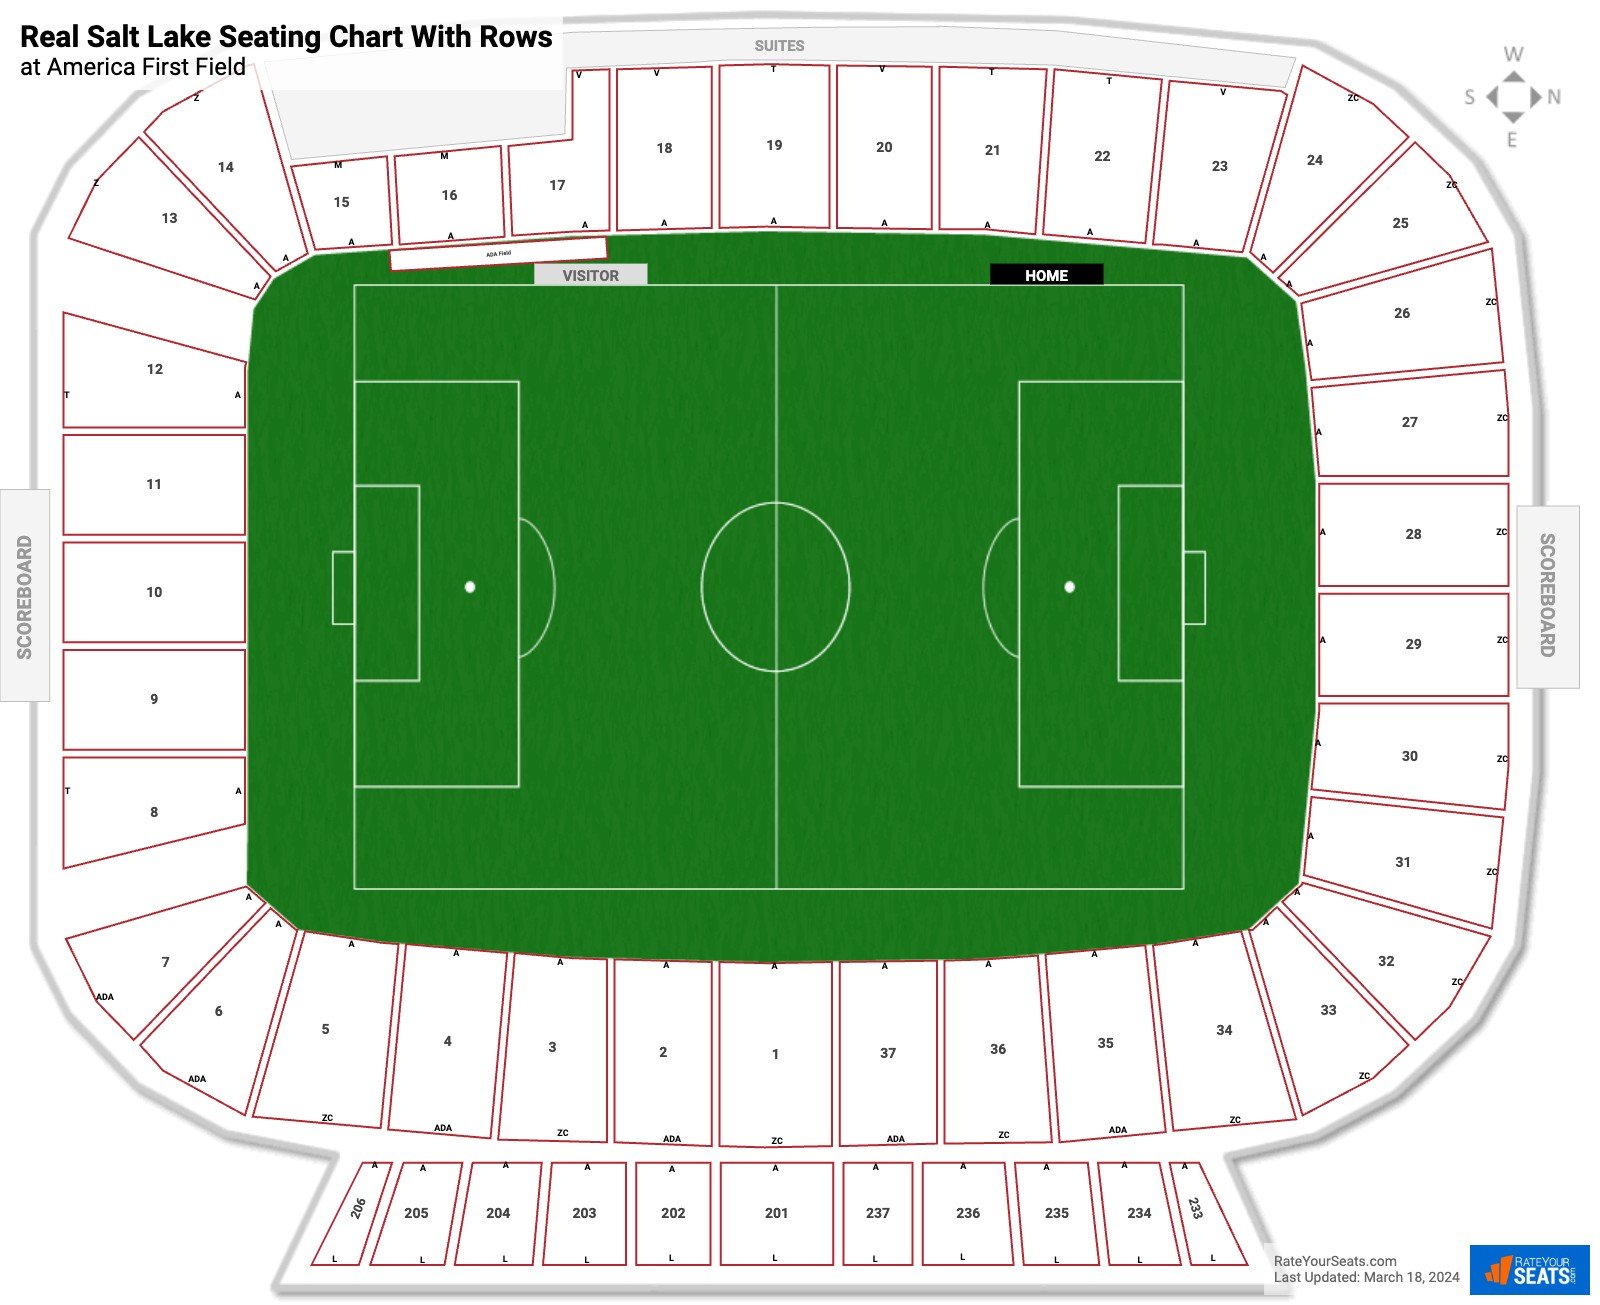 Rio Tinto Stadium seating chart with row numbers